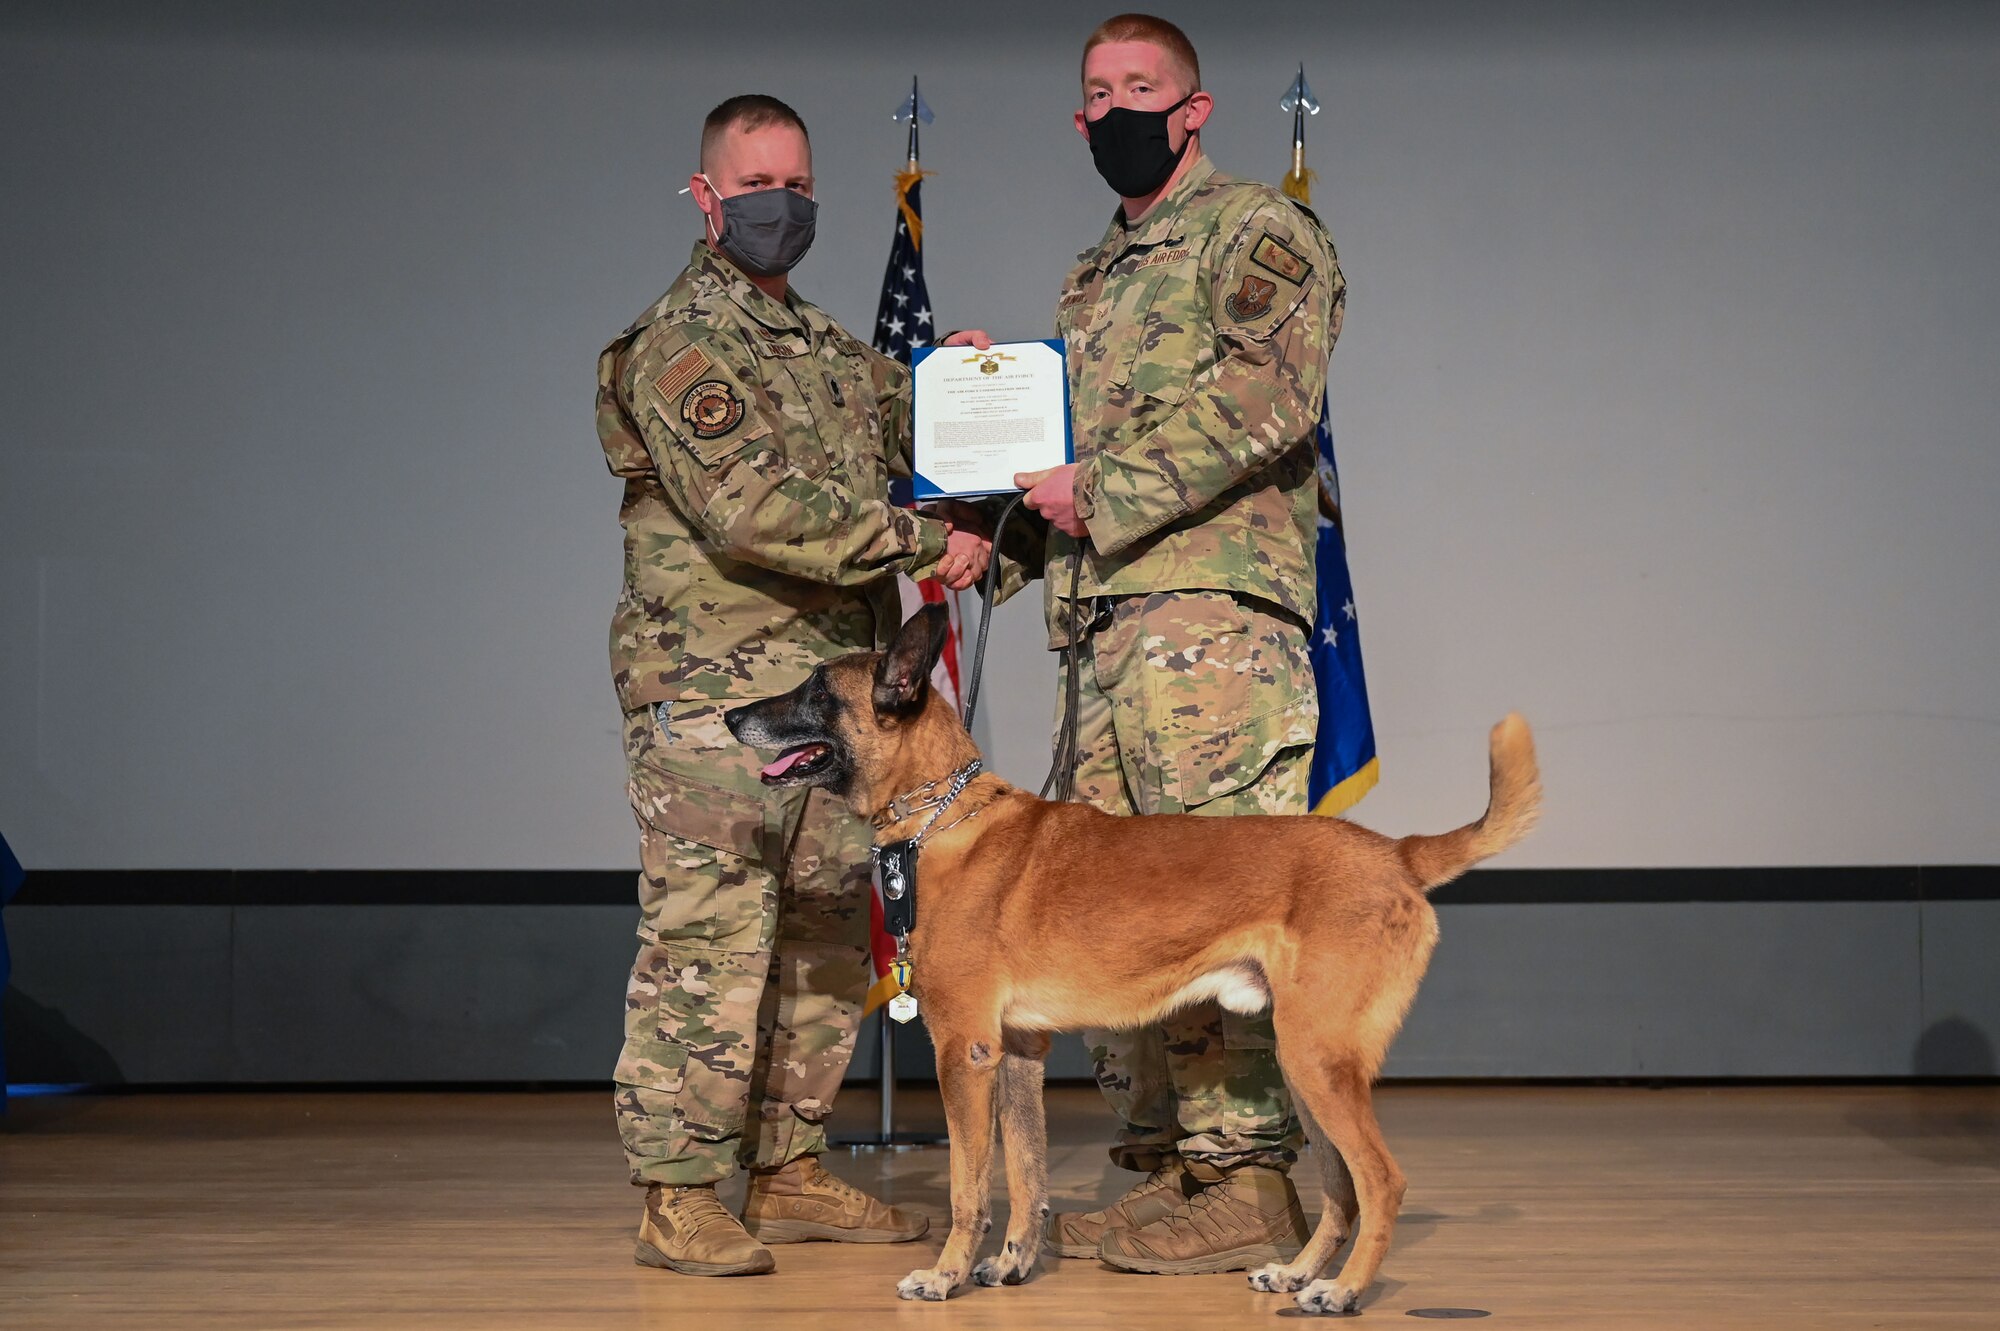 MWD Ggarbo receives a commendation during a retirement ceremony at Kirtland Air Force Base.